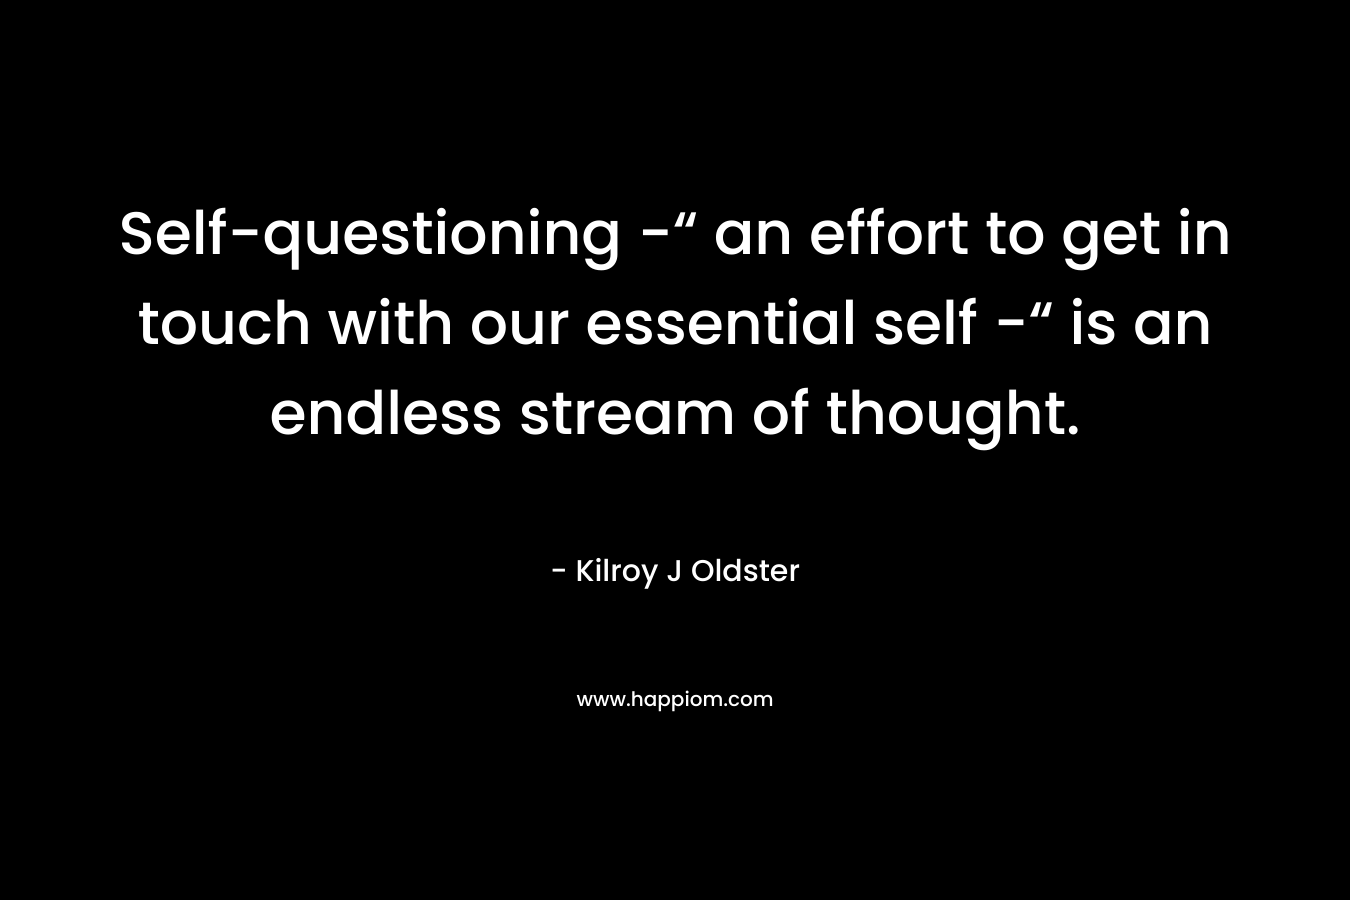 Self-questioning -“ an effort to get in touch with our essential self -“ is an endless stream of thought.